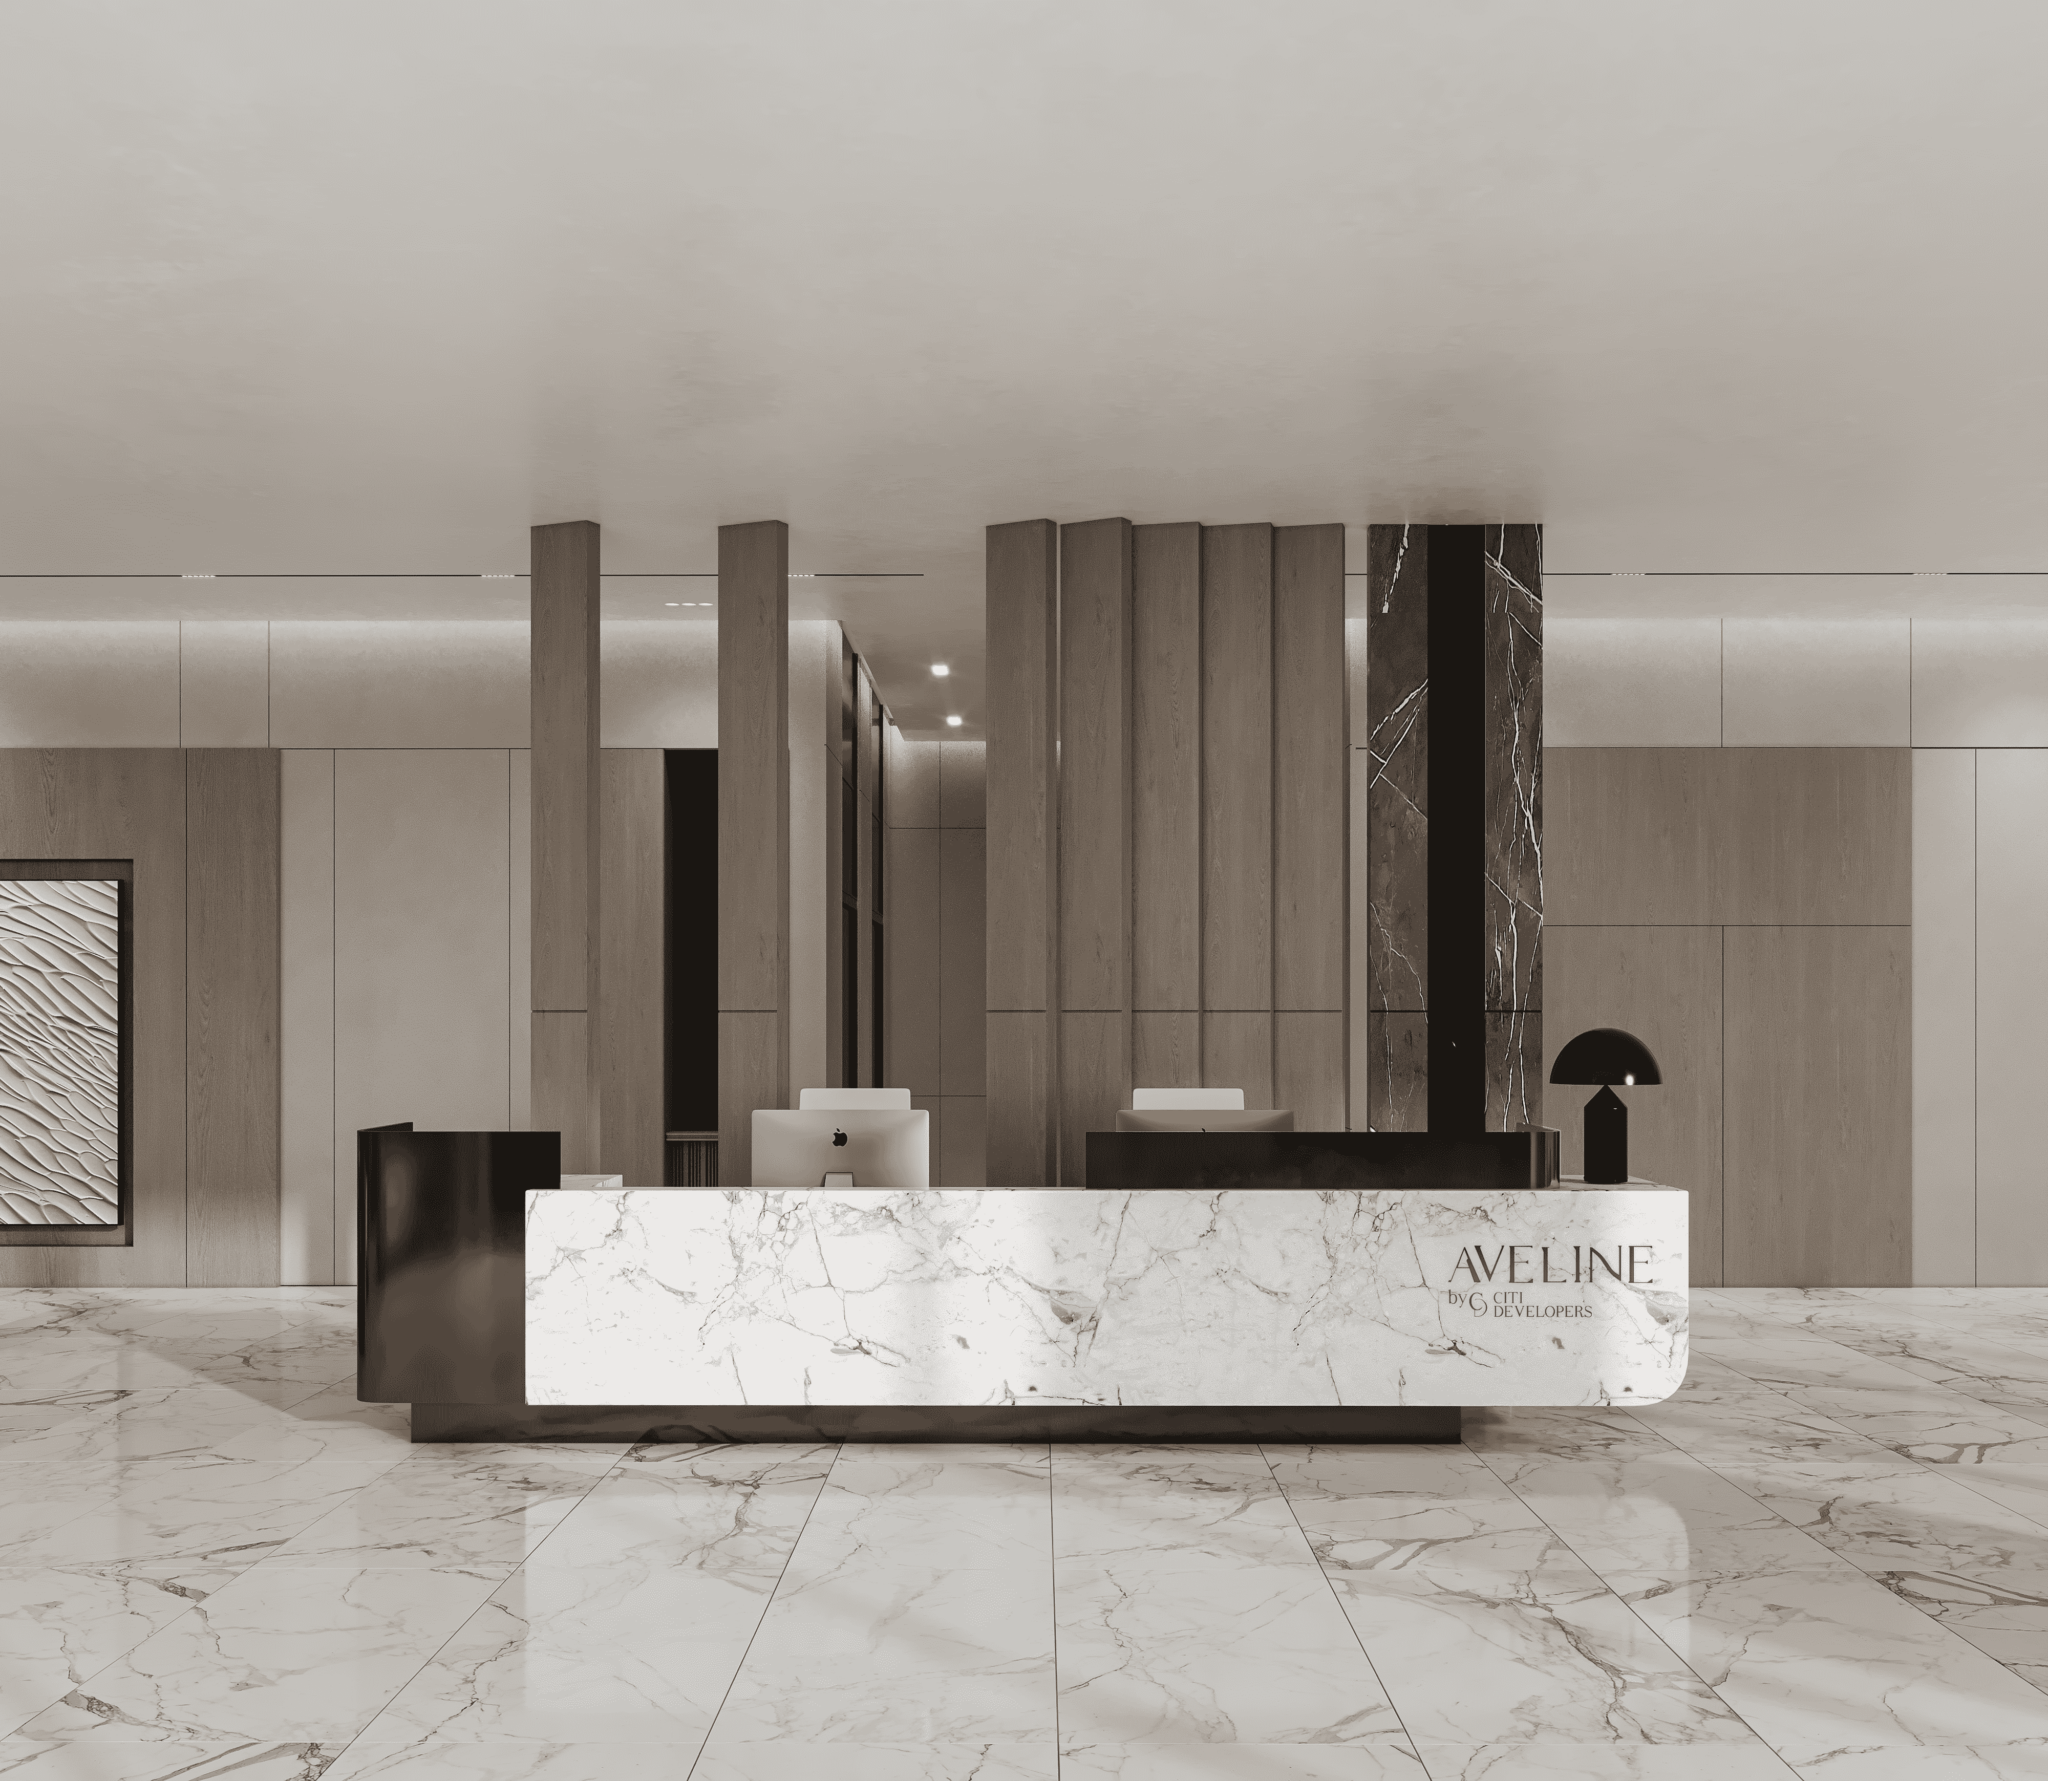 The reception area at Aveline Residences with ‘AVELINE RESIDENCES’ on the marble desk, reflecting the sophistication of JVC, Dubai.